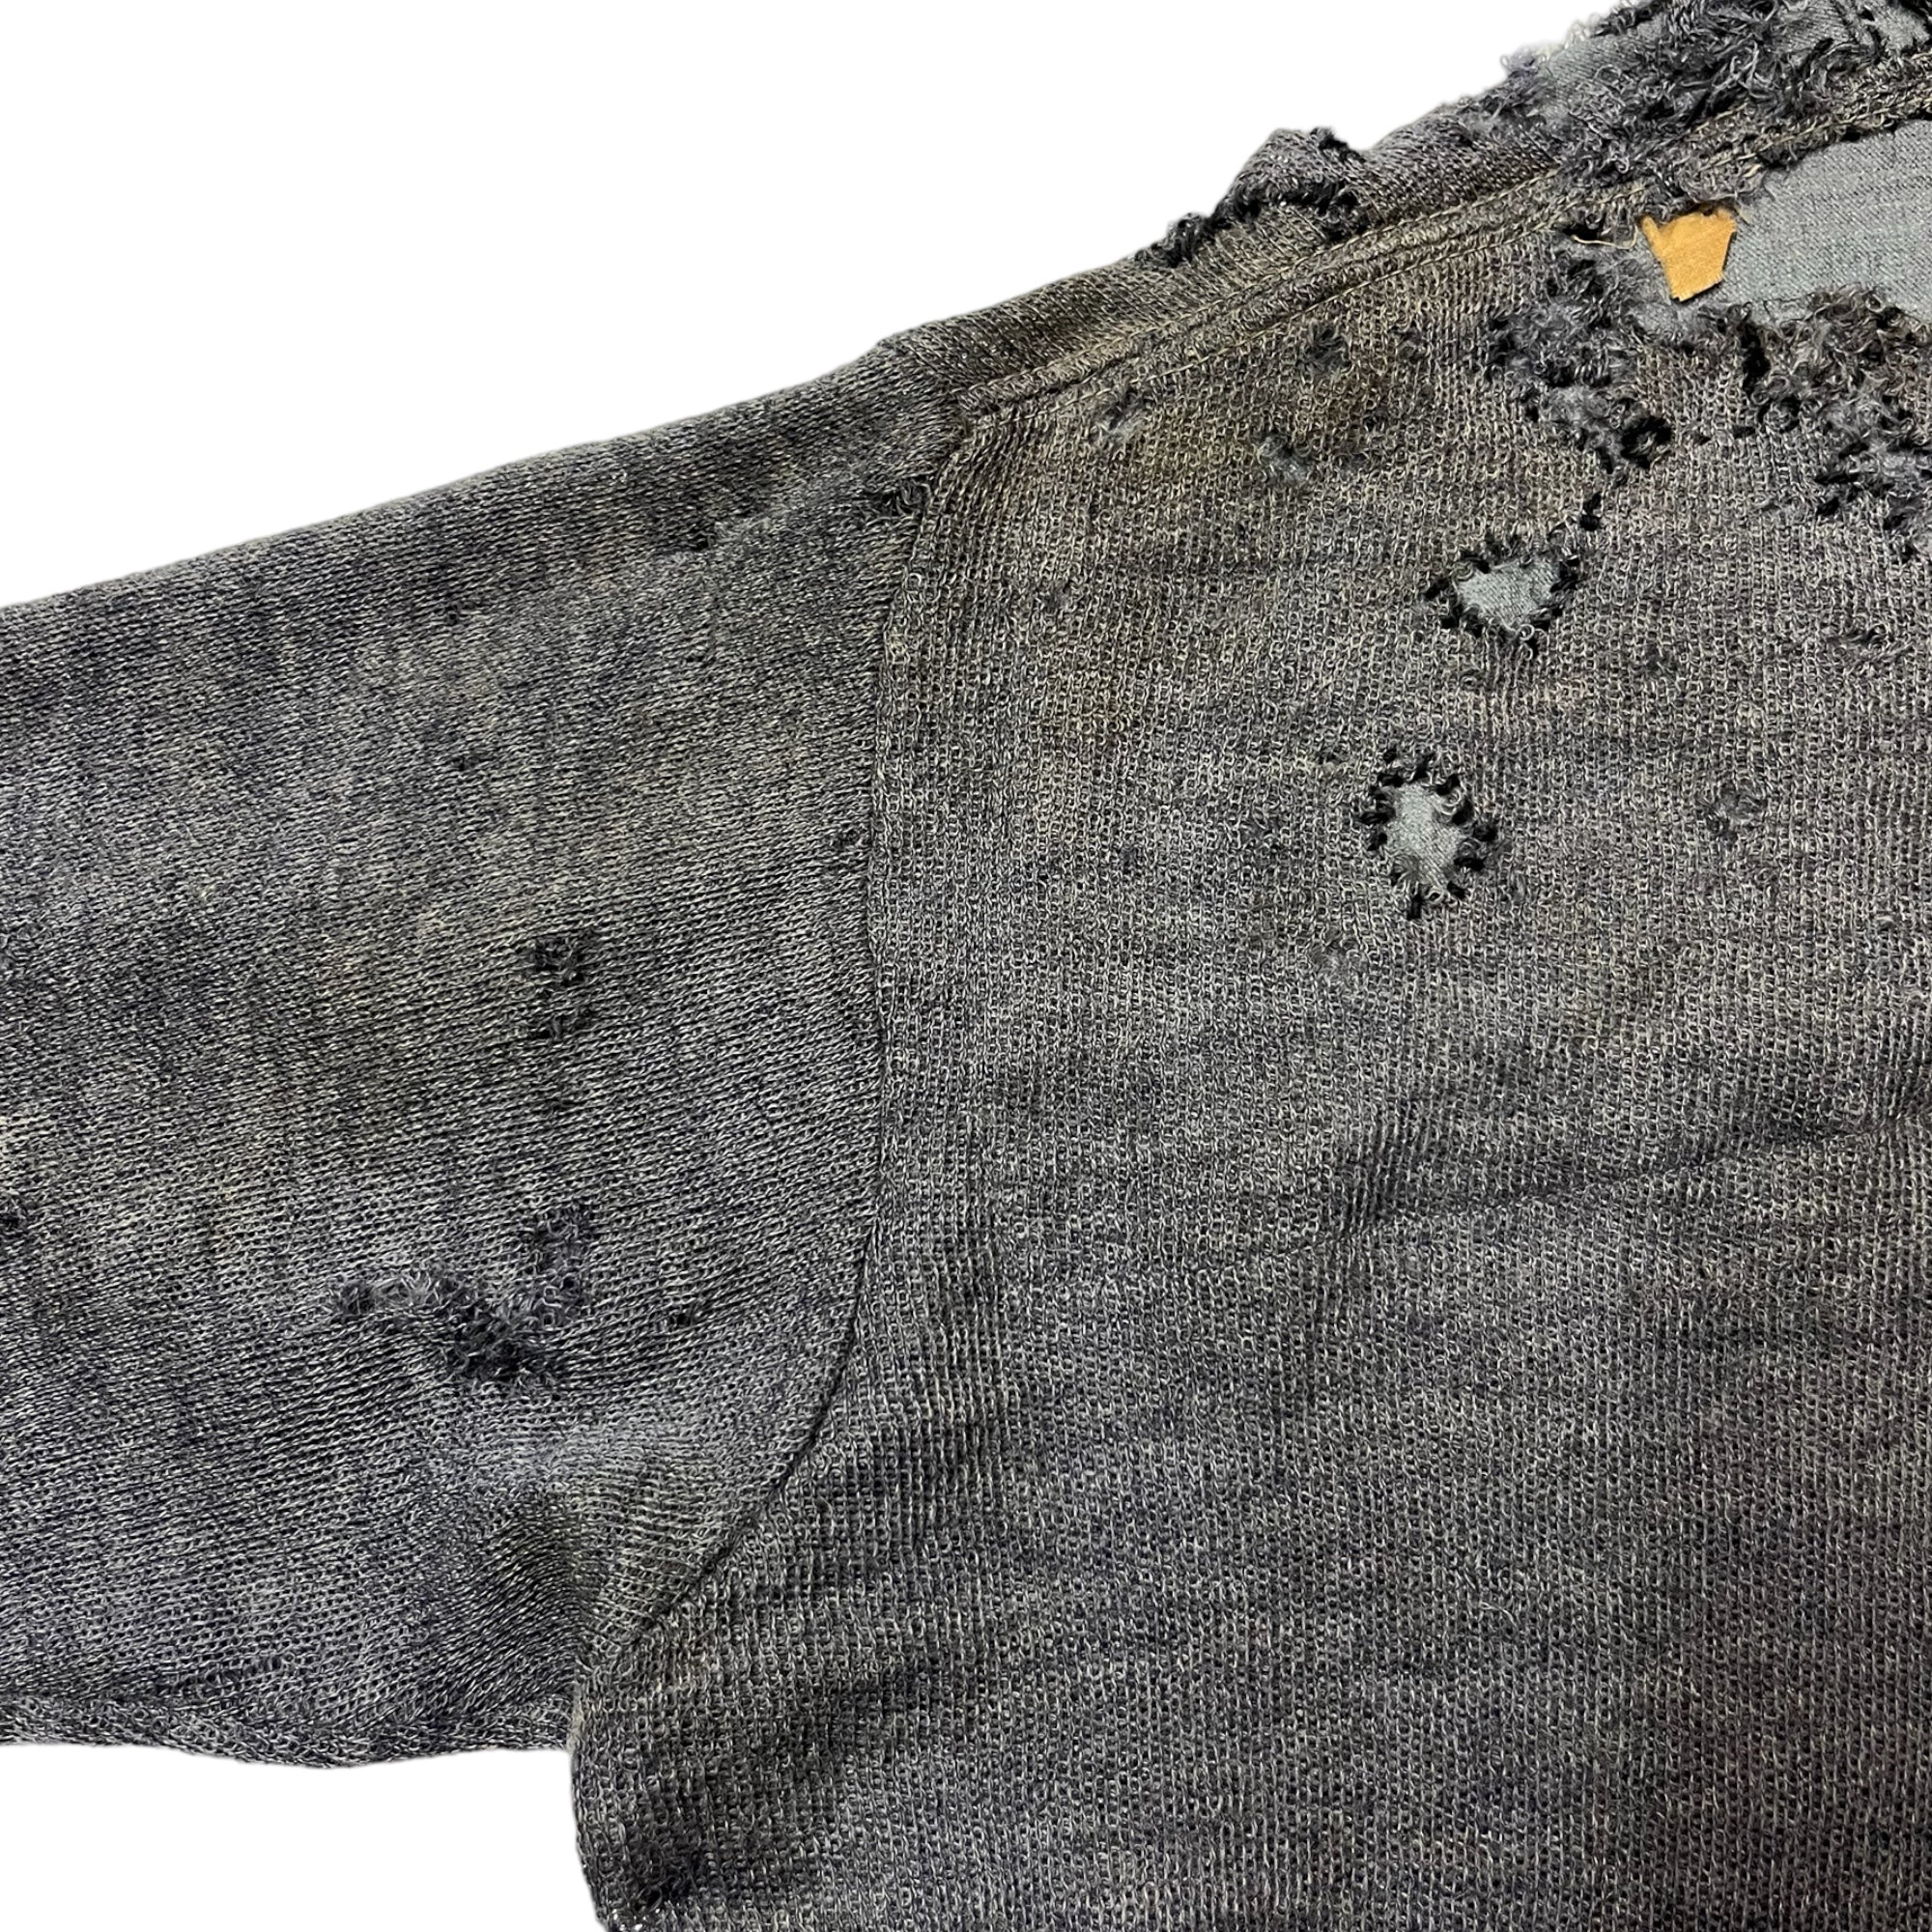 1950s Distressed Wool Cardigan With Extensive Repairs and Darning - Stone Grey - S